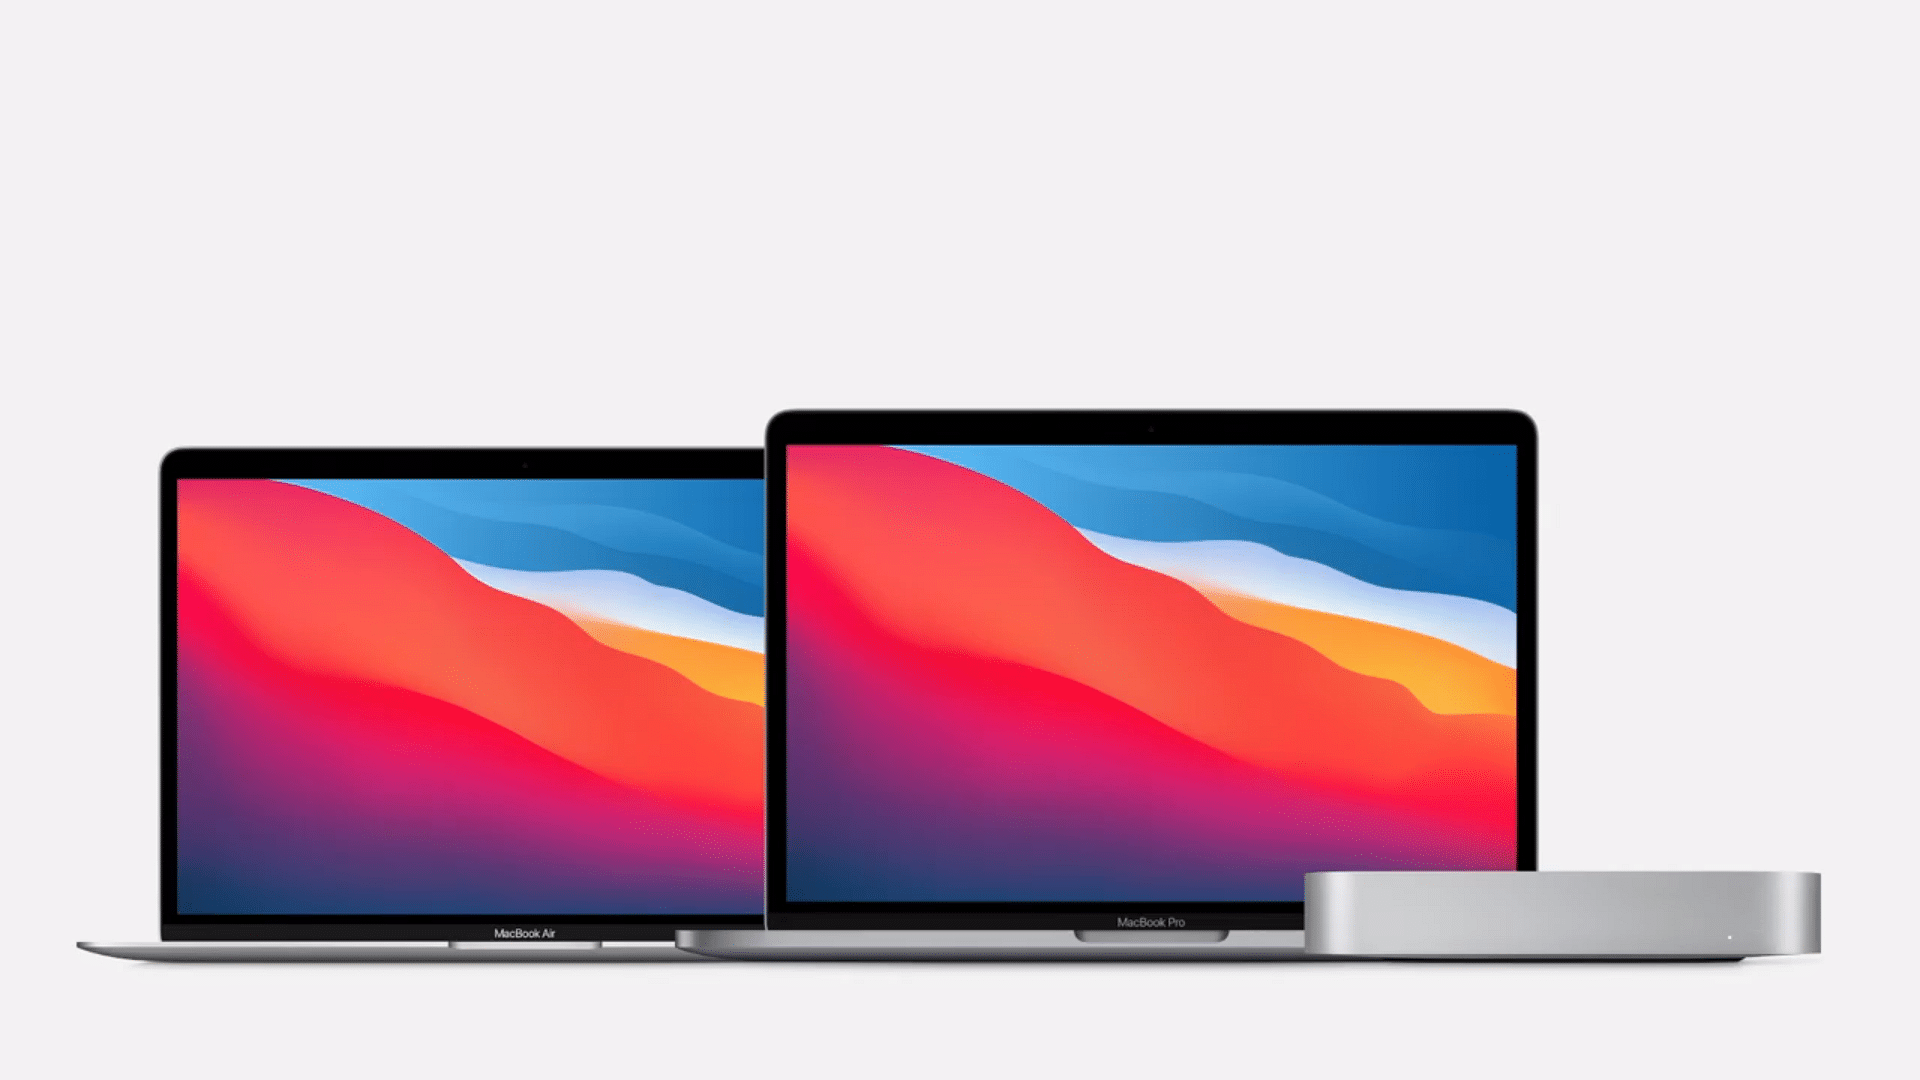 Apple launched three new products at its main event in November.